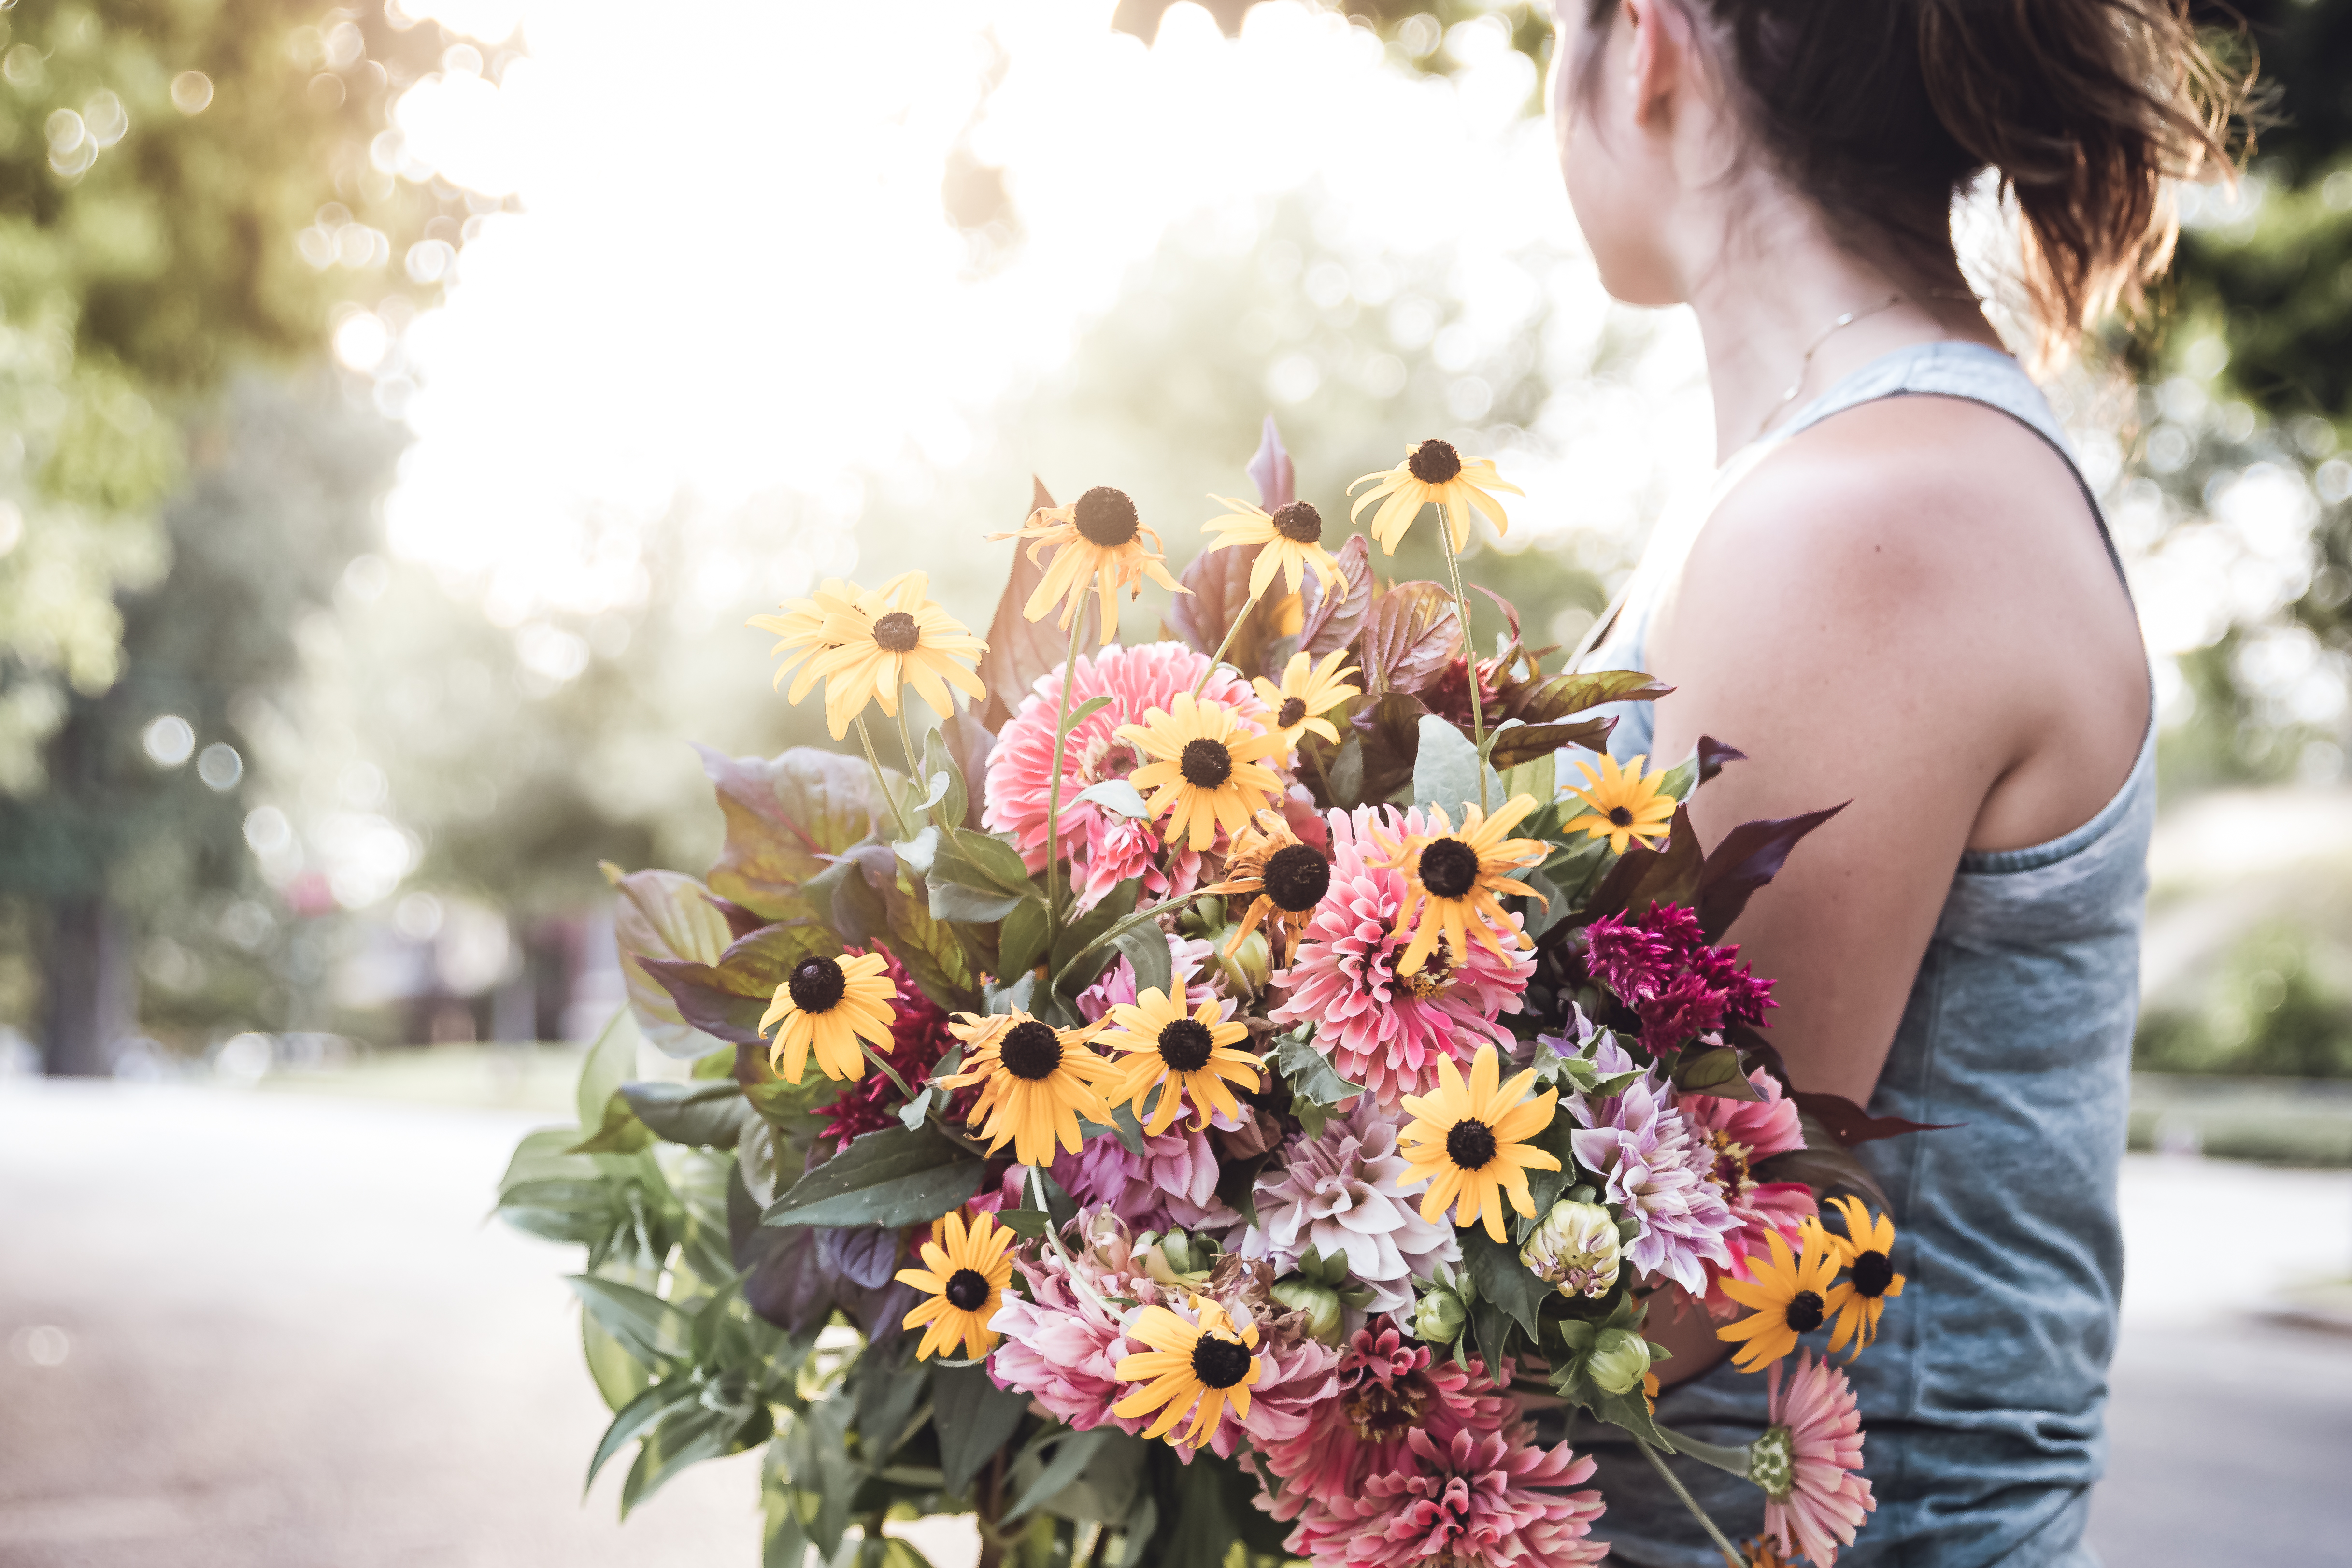 young lady holding a beautiful bouquet of flowers